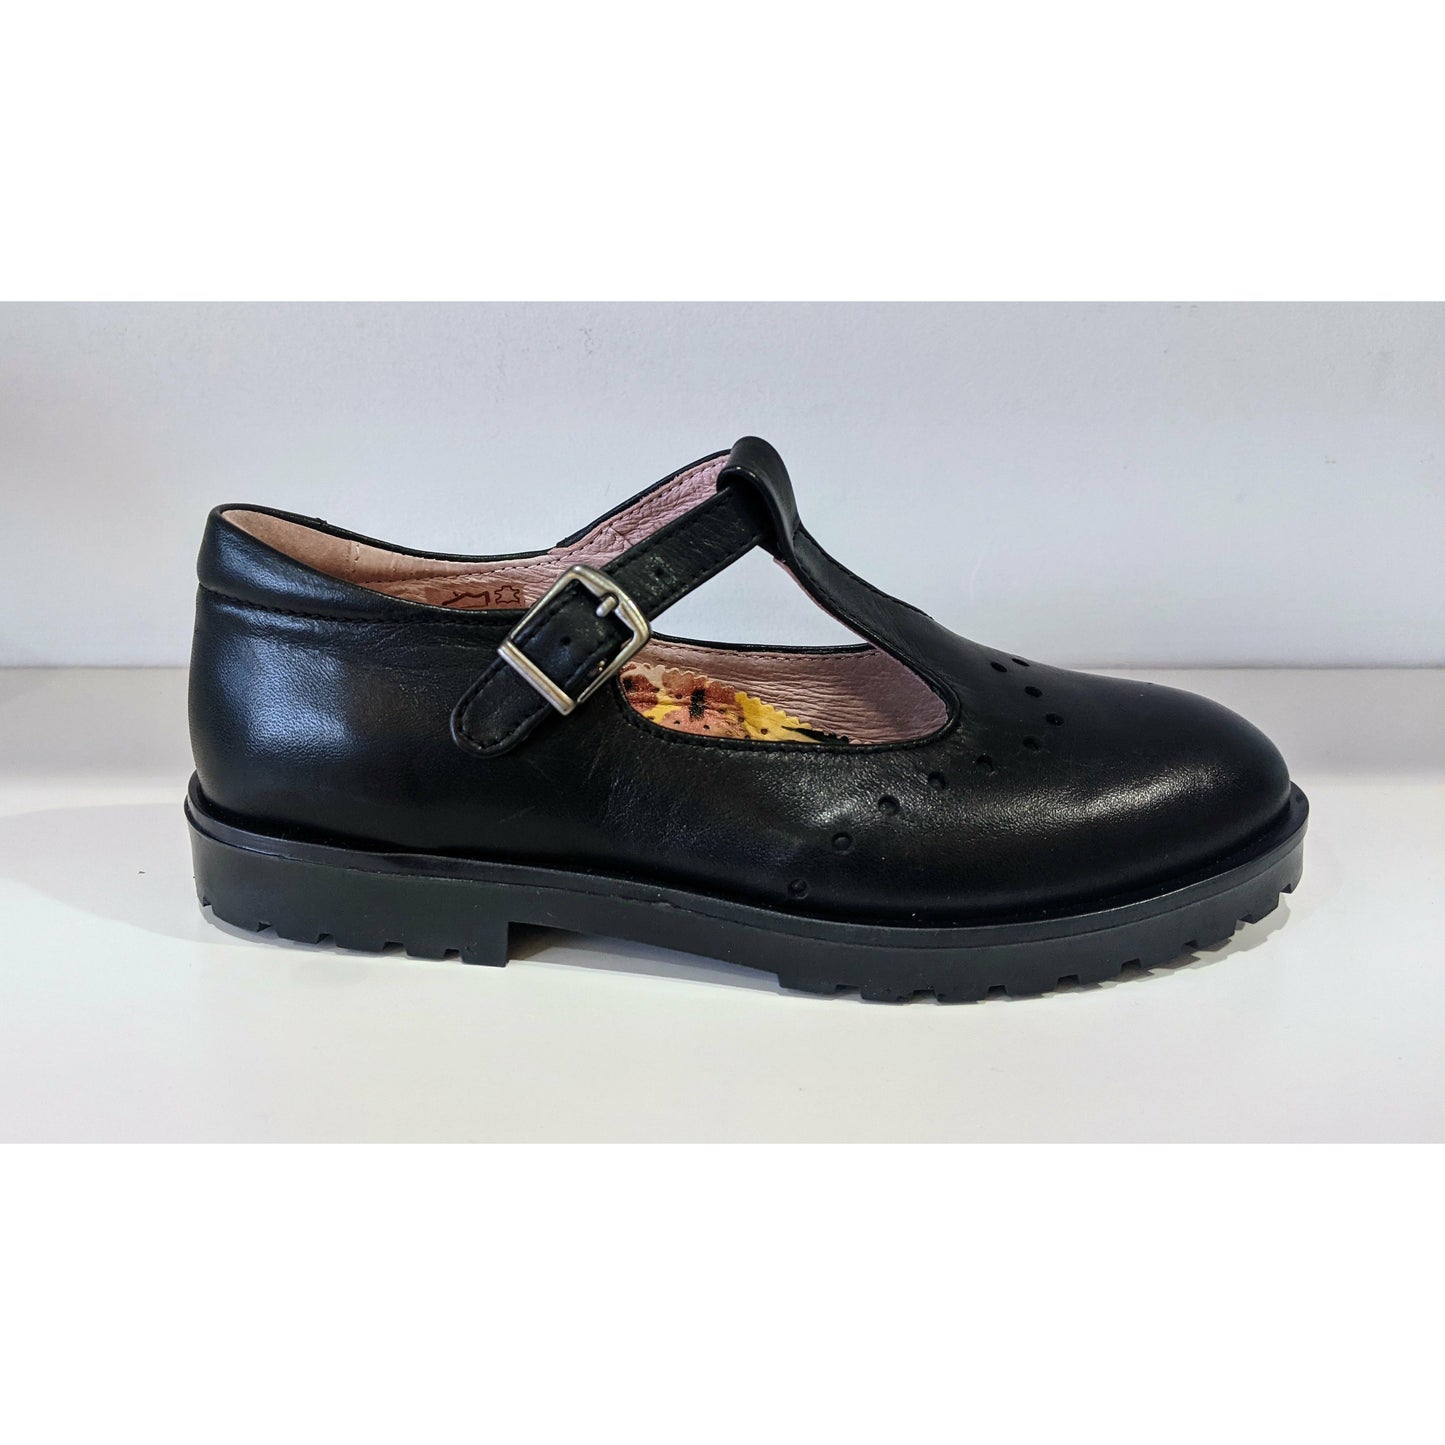 A girls T-Bar school shoe by Petasil, style Tangier, in black with buckle fastening. Right side view.